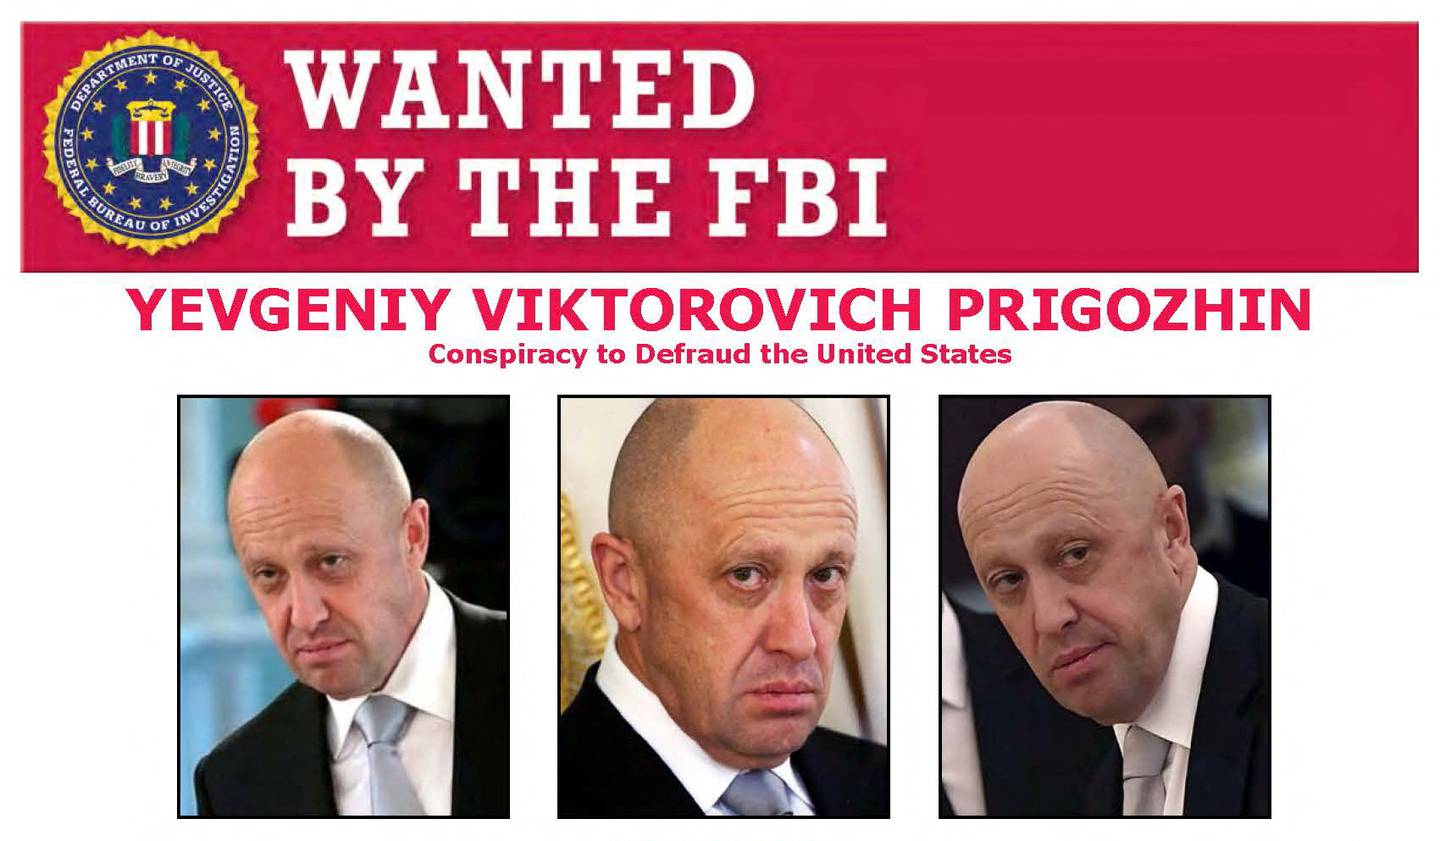 The US imposed sanctions against Yevgeny Prigozhin earlier this year. Reuters.